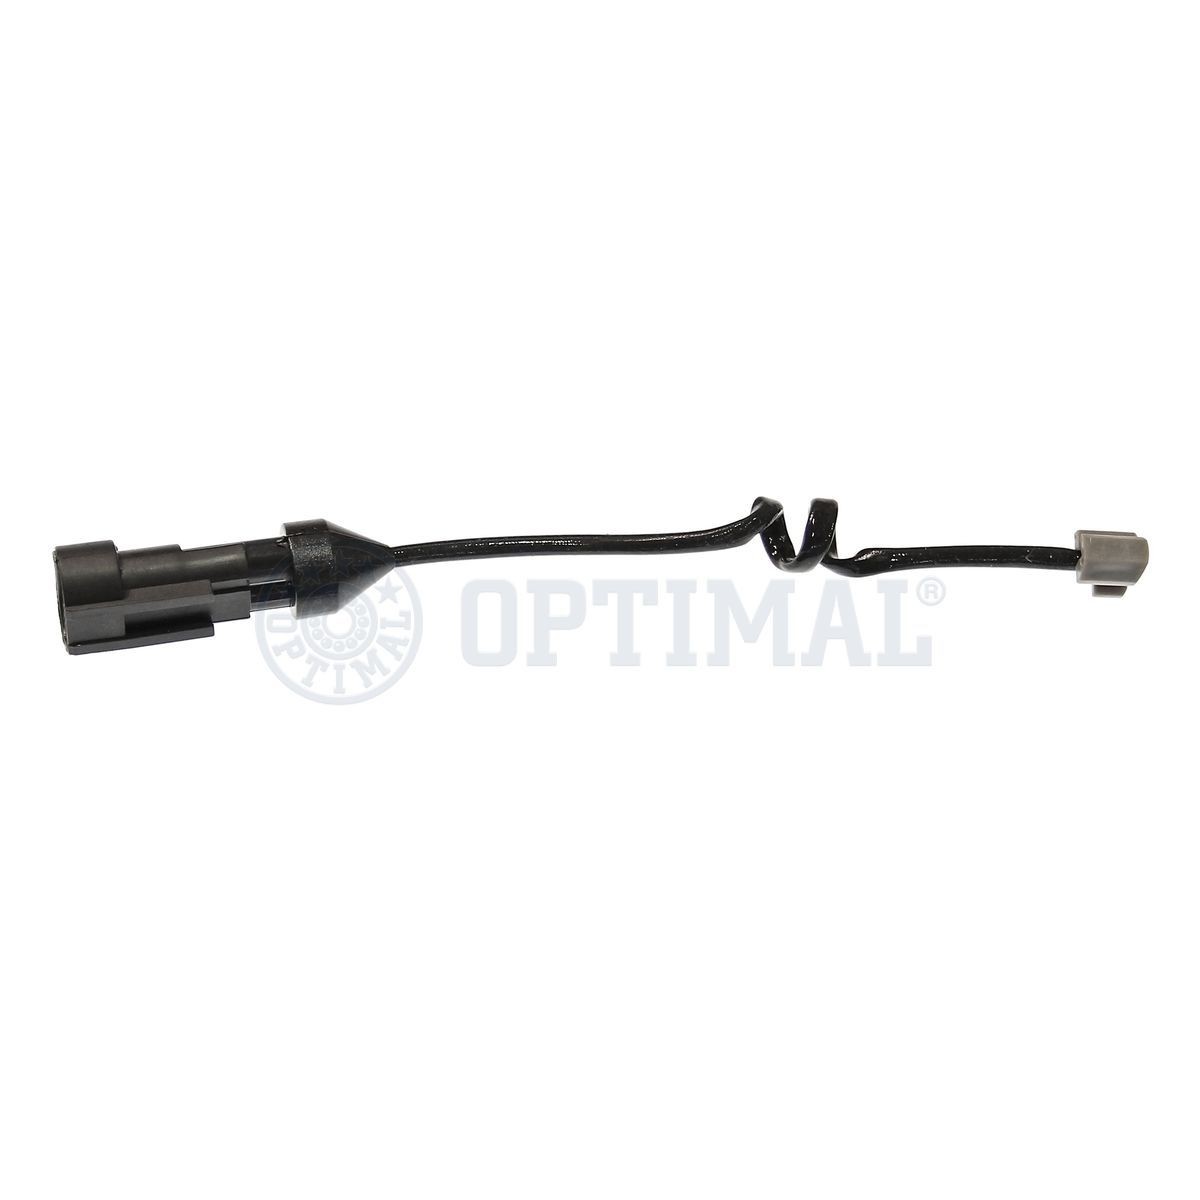 OPTIMAL Front Axle Length: 155mm, Warning Contact Length: 210mm Warning contact, brake pad wear WKT-60058K buy